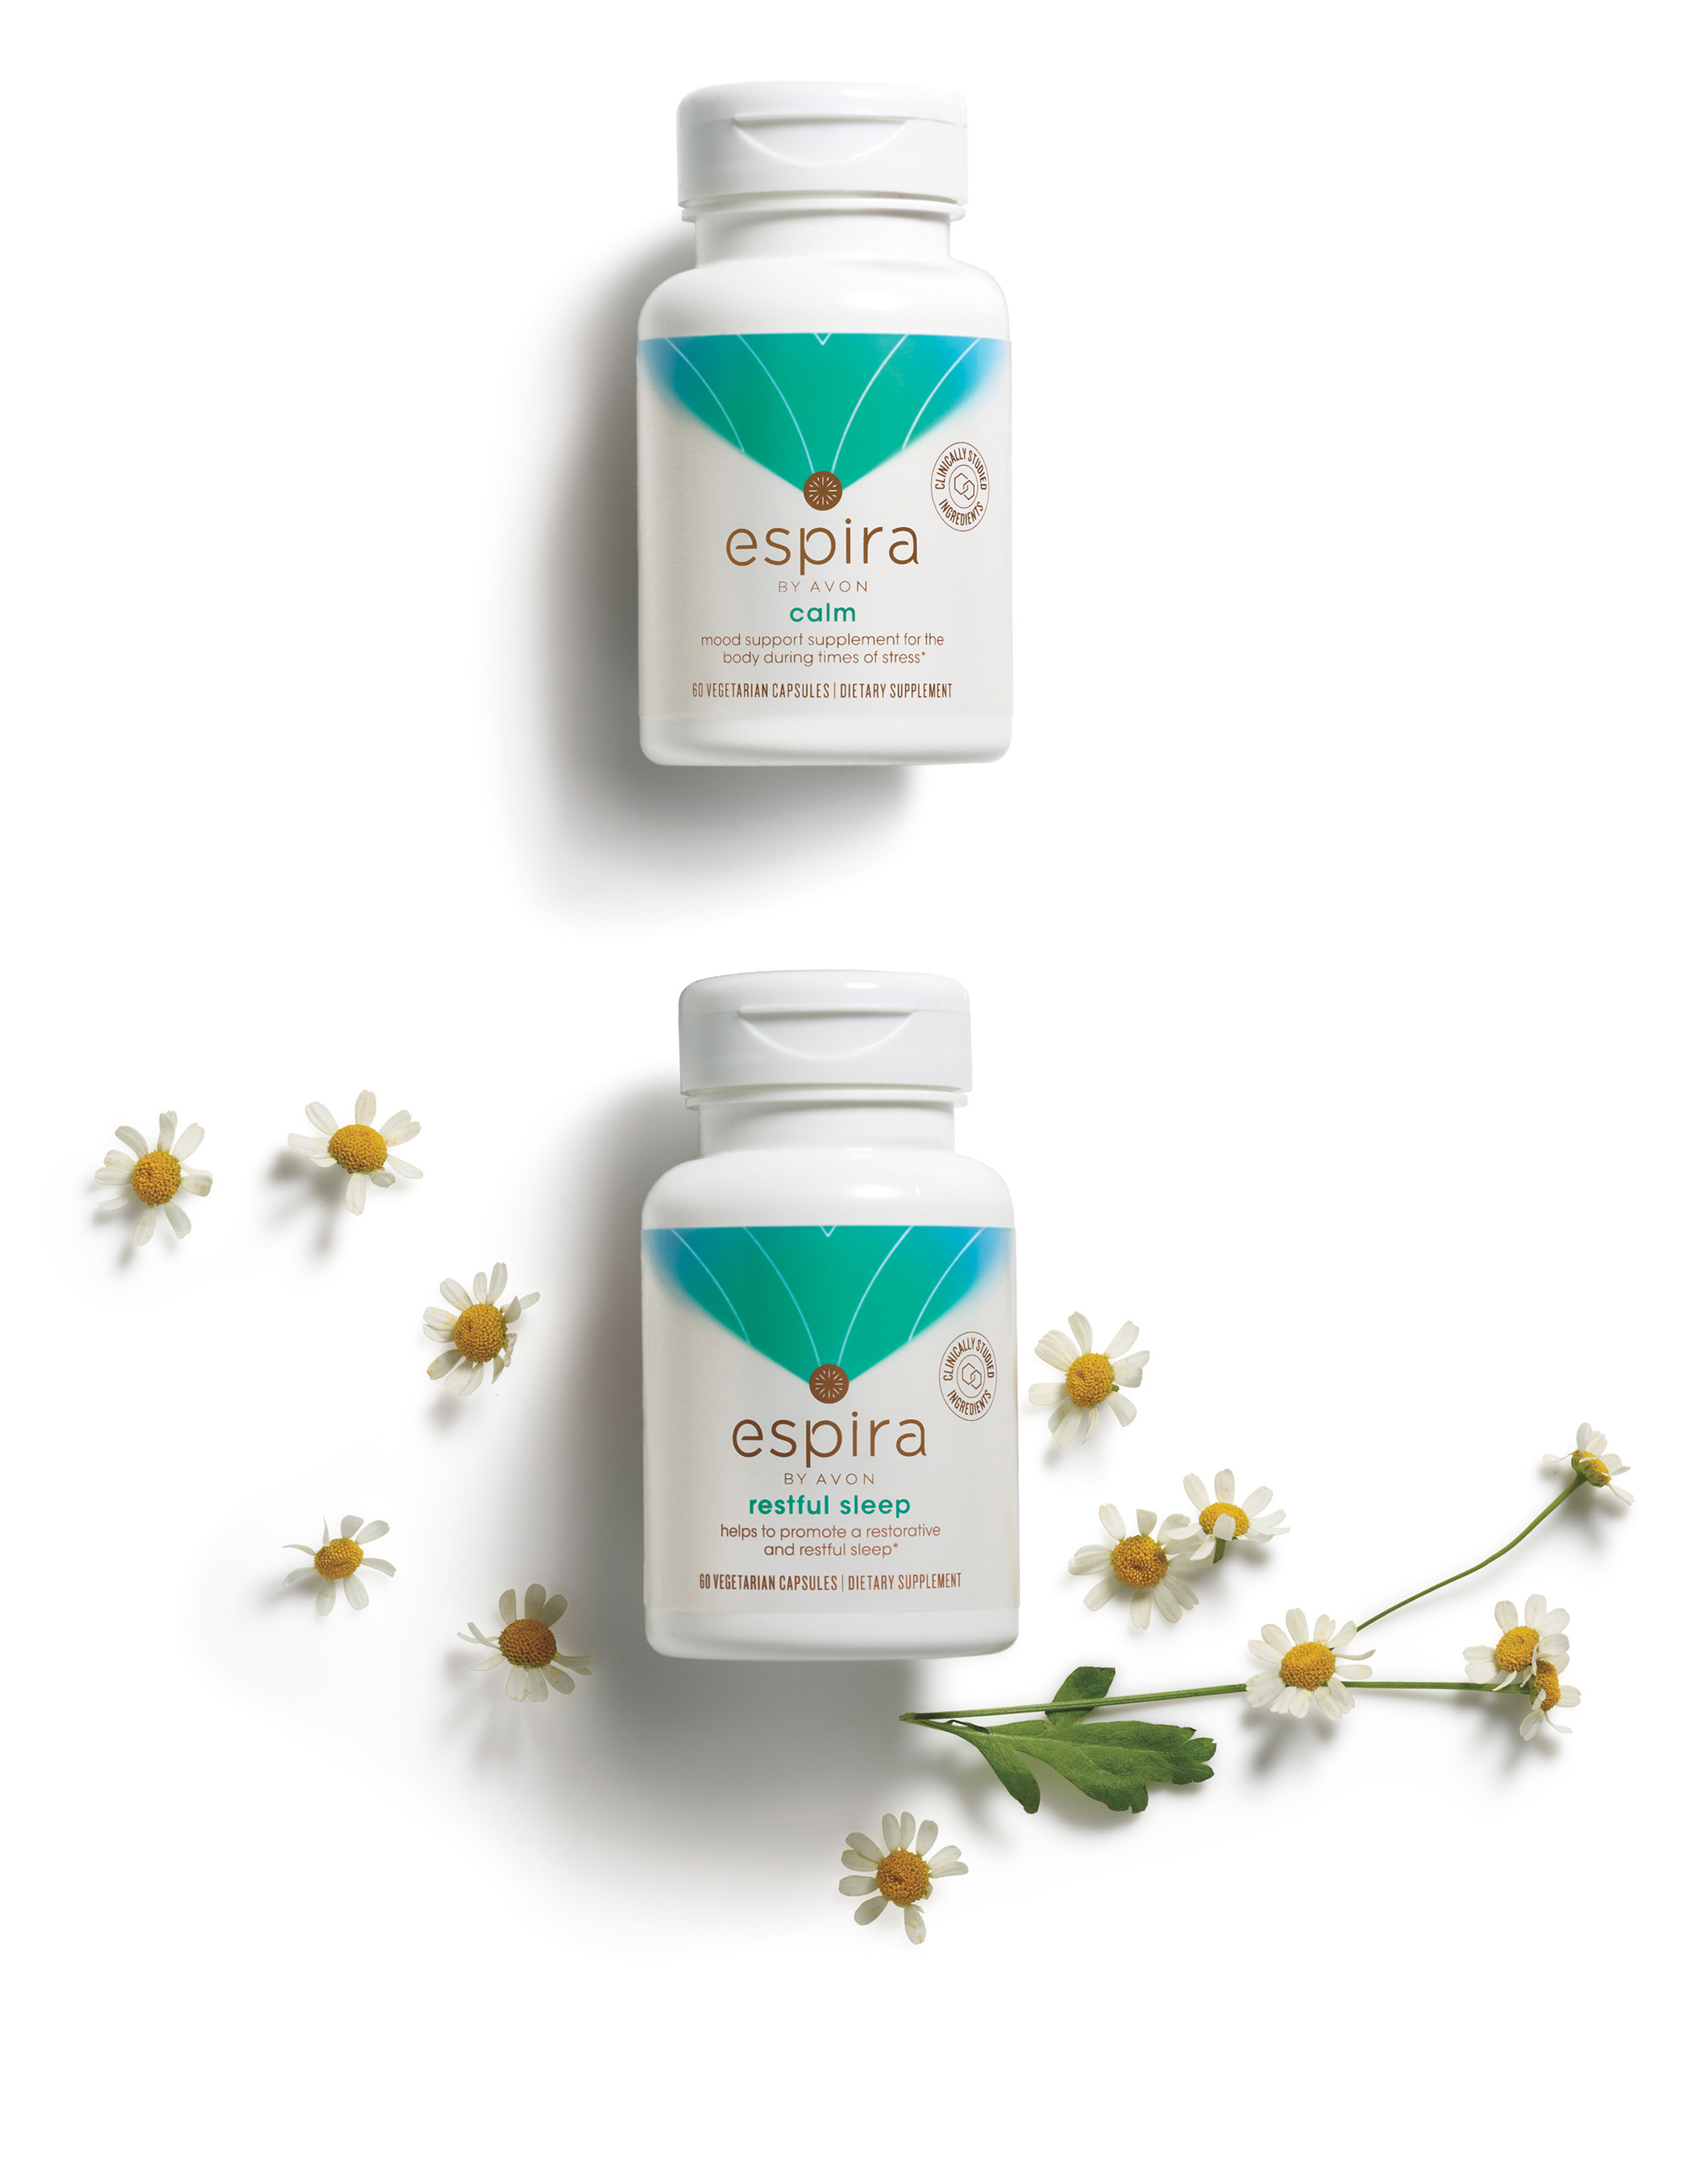 Espira By Avon Calm supplements support relaxation and boosts natural energy while Restful Sleep supplements promote restorative and restful sleep.